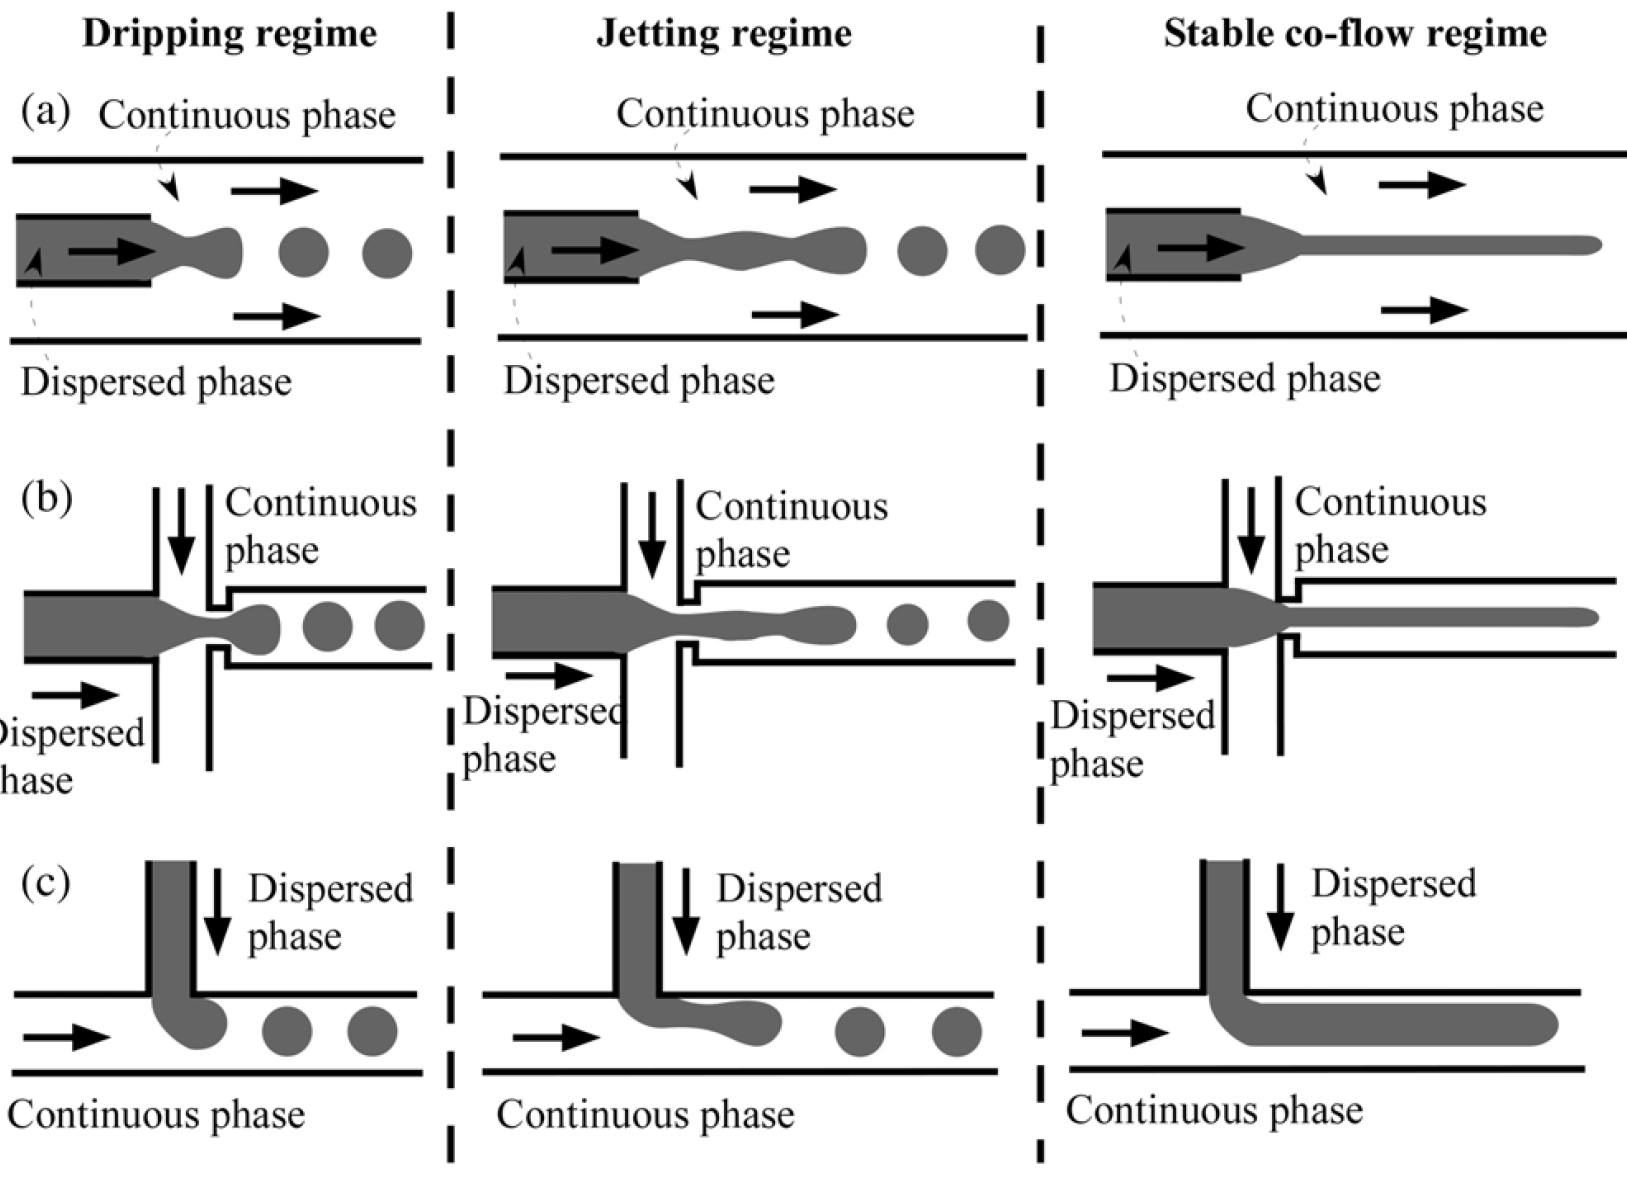 Schematic drawings of different ways to generate droplets and fibers.